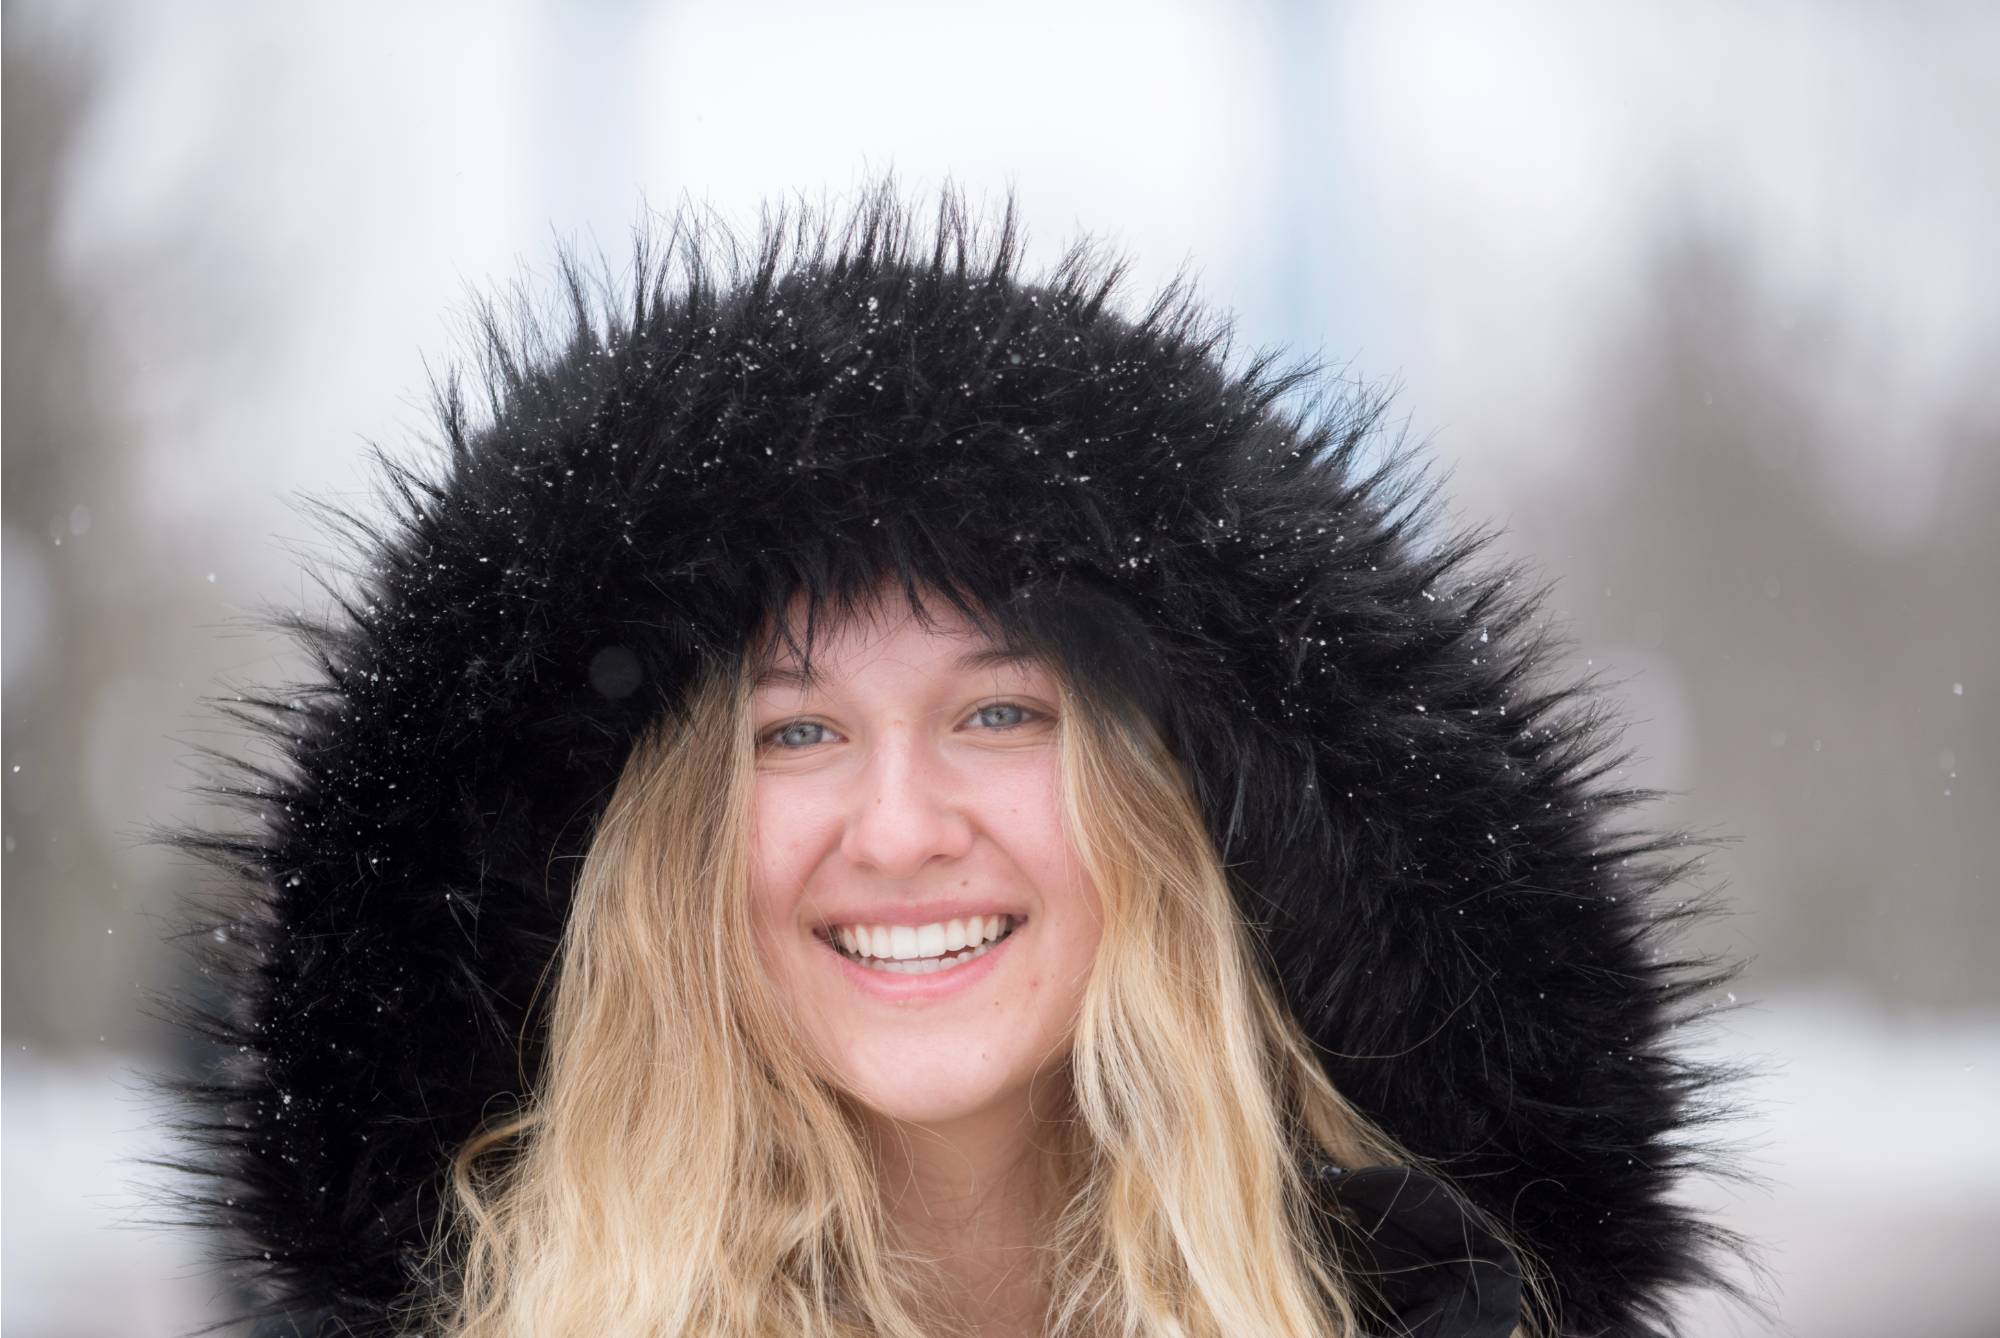 A student smiling in the snow